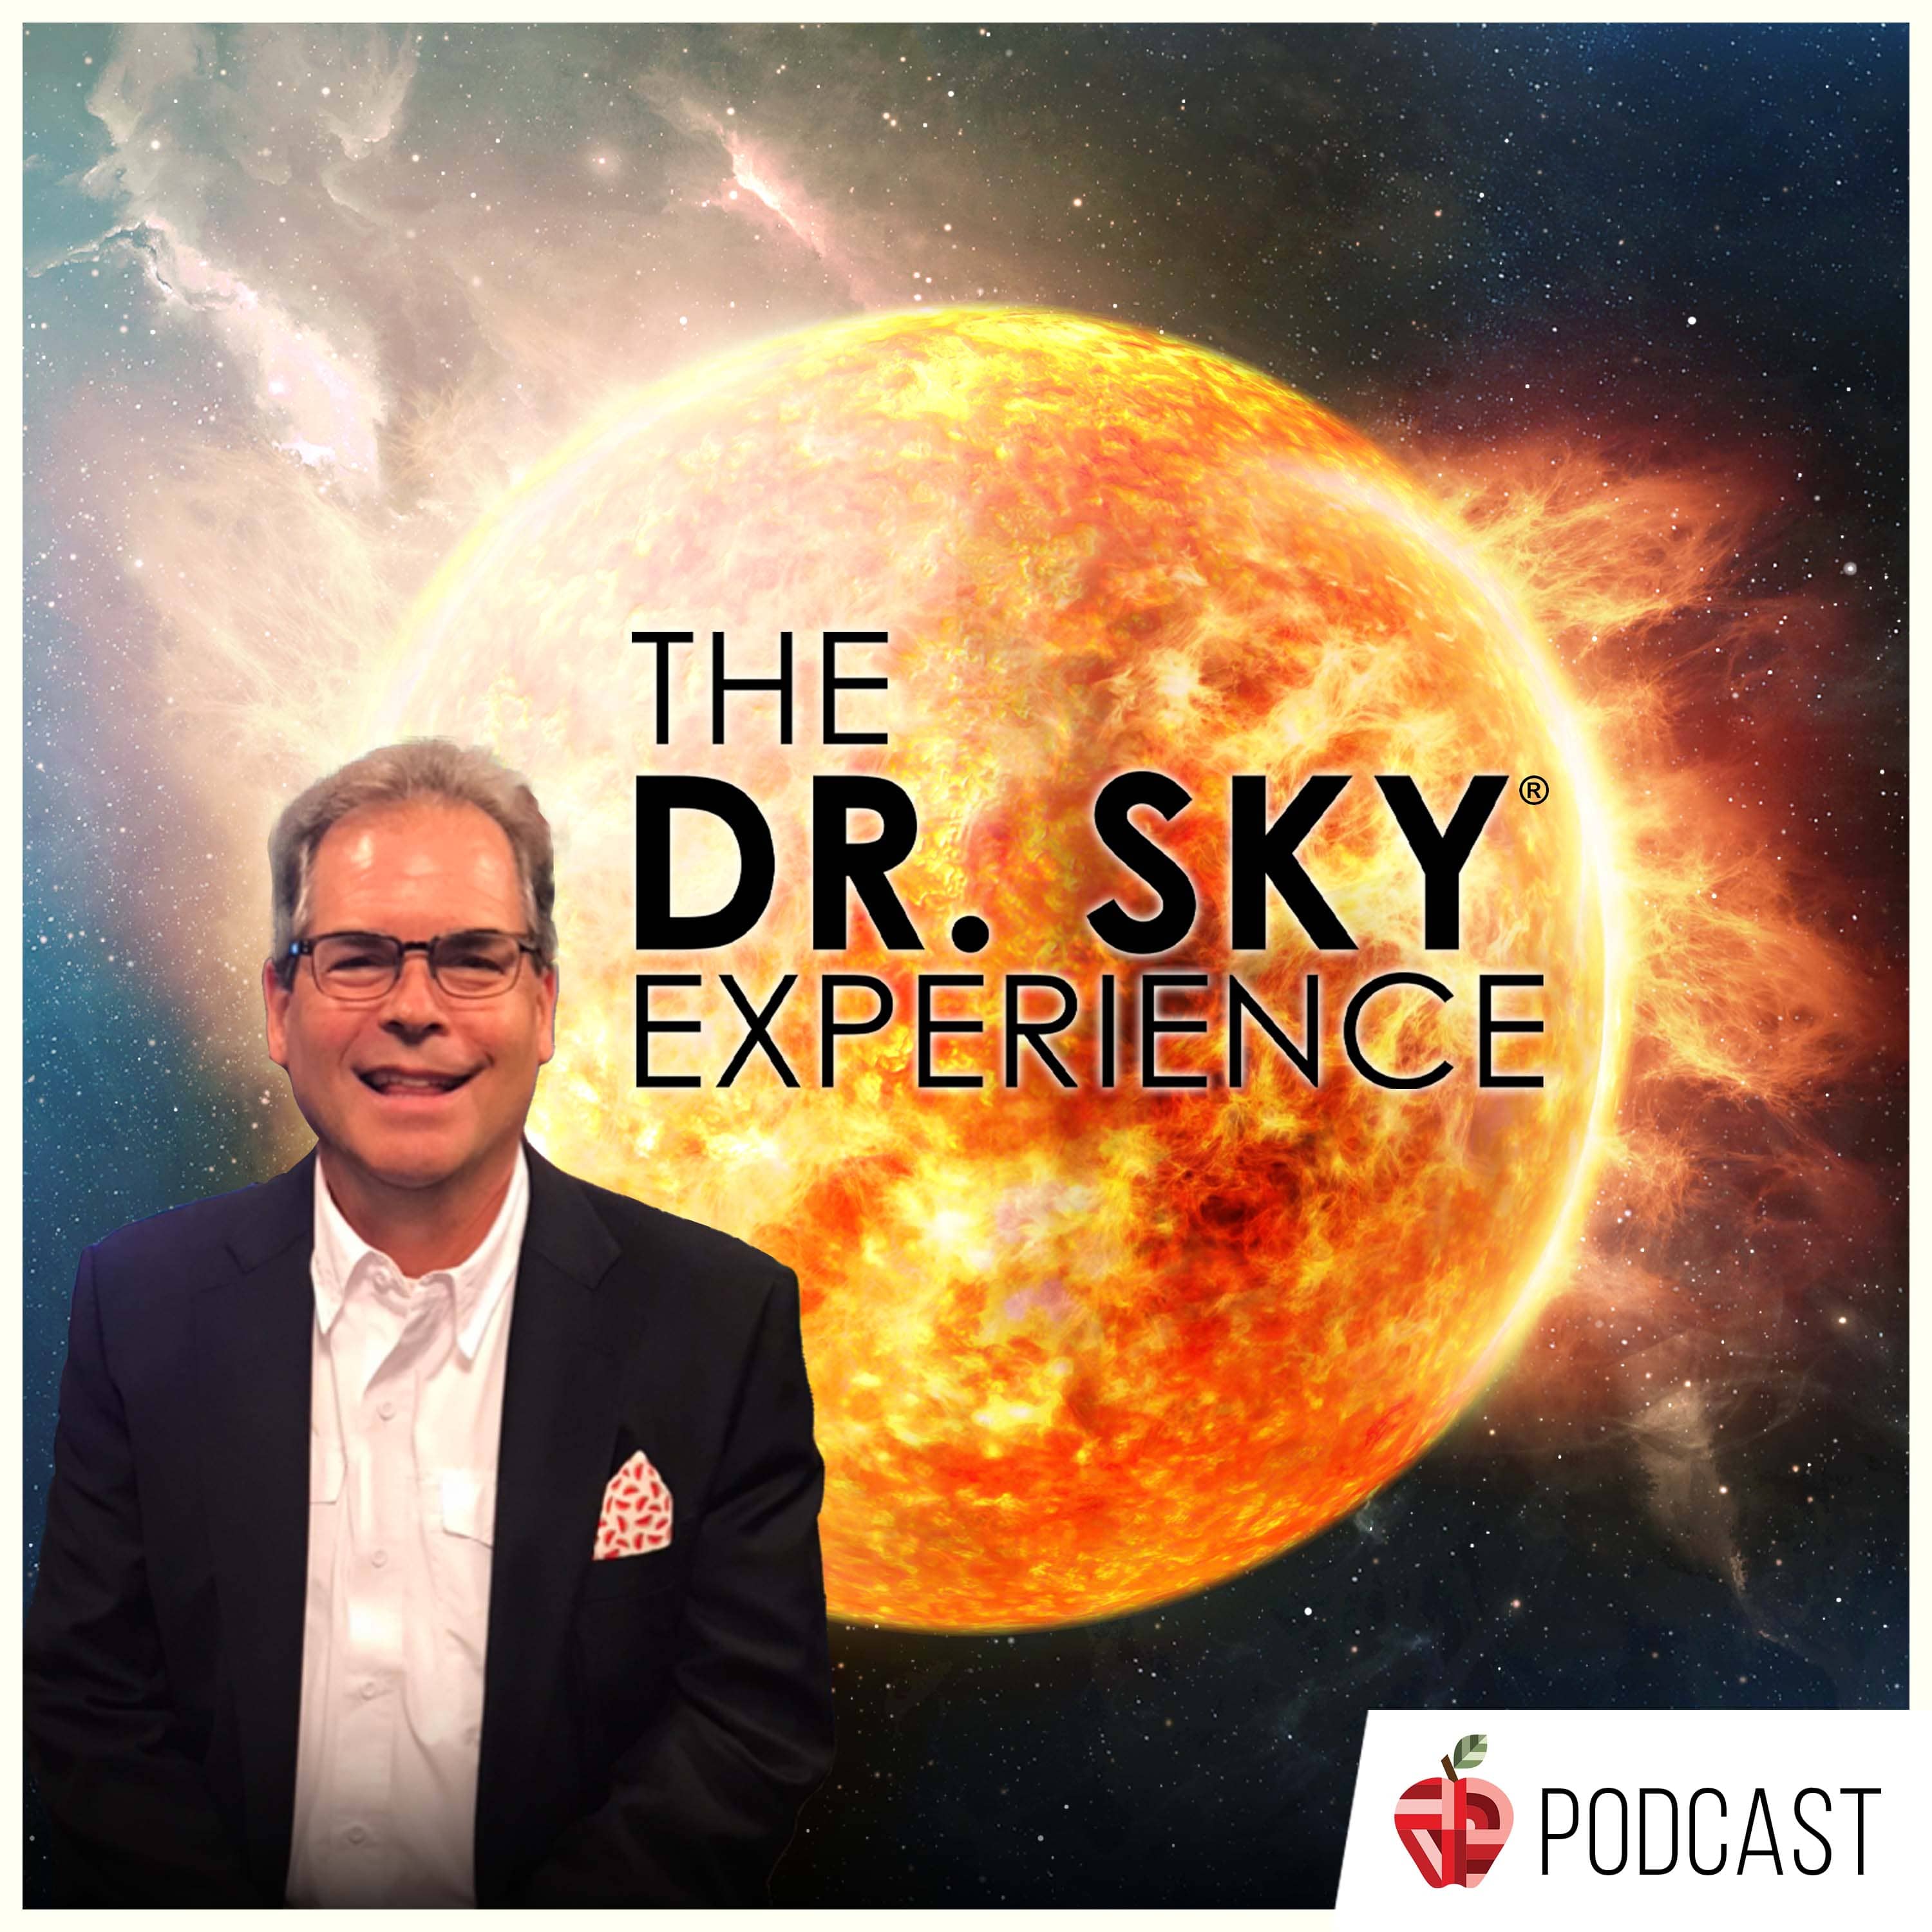 The Dr. Sky Experience